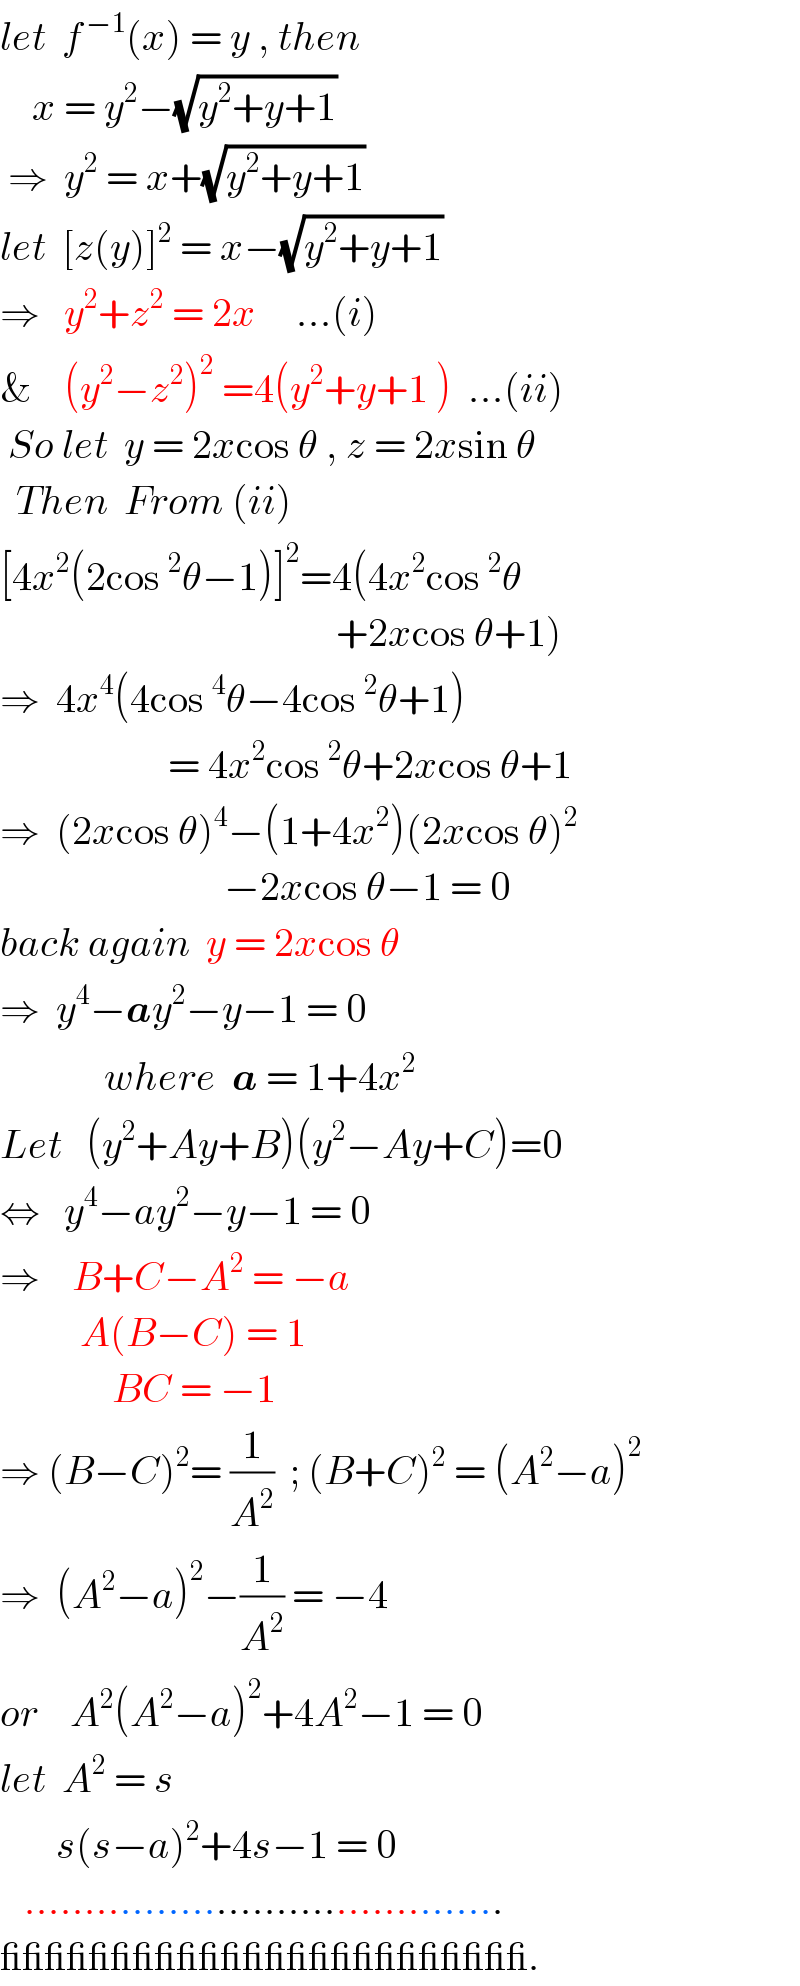 let  f^( −1) (x) = y , then      x = y^2 −(√(y^2 +y+1))   ⇒  y^2  = x+(√(y^2 +y+1))   let  [z(y)]^2  = x−(√(y^2 +y+1))   ⇒   y^2 +z^2  = 2x     ...(i)  &    (y^2 −z^2 )^2  =4(y^2 +y+1 )  ...(ii)   So let  y = 2xcos θ , z = 2xsin θ    Then  From (ii)  [4x^2 (2cos^2 θ−1)]^2 =4(4x^2 cos^2 θ                                            +2xcos θ+1)  ⇒  4x^4 (4cos^4 θ−4cos^2 θ+1)                       = 4x^2 cos^2 θ+2xcos θ+1  ⇒  (2xcos θ)^4 −(1+4x^2 )(2xcos θ)^2                               −2xcos θ−1 = 0  back again  y = 2xcos θ  ⇒  y^4 −ay^2 −y−1 = 0               where  a = 1+4x^2   Let   (y^2 +Ay+B)(y^2 −Ay+C)=0  ⇔   y^4 −ay^2 −y−1 = 0  ⇒    B+C−A^2  = −a            A(B−C) = 1                BC = −1  ⇒ (B−C)^2 = (1/A^2 )  ; (B+C)^2  = (A^2 −a)^2   ⇒  (A^2 −a)^2 −(1/A^2 ) = −4   or    A^2 (A^2 −a)^2 +4A^2 −1 = 0  let  A^2  = s         s(s−a)^2 +4s−1 = 0     ........................................  ________________________.  